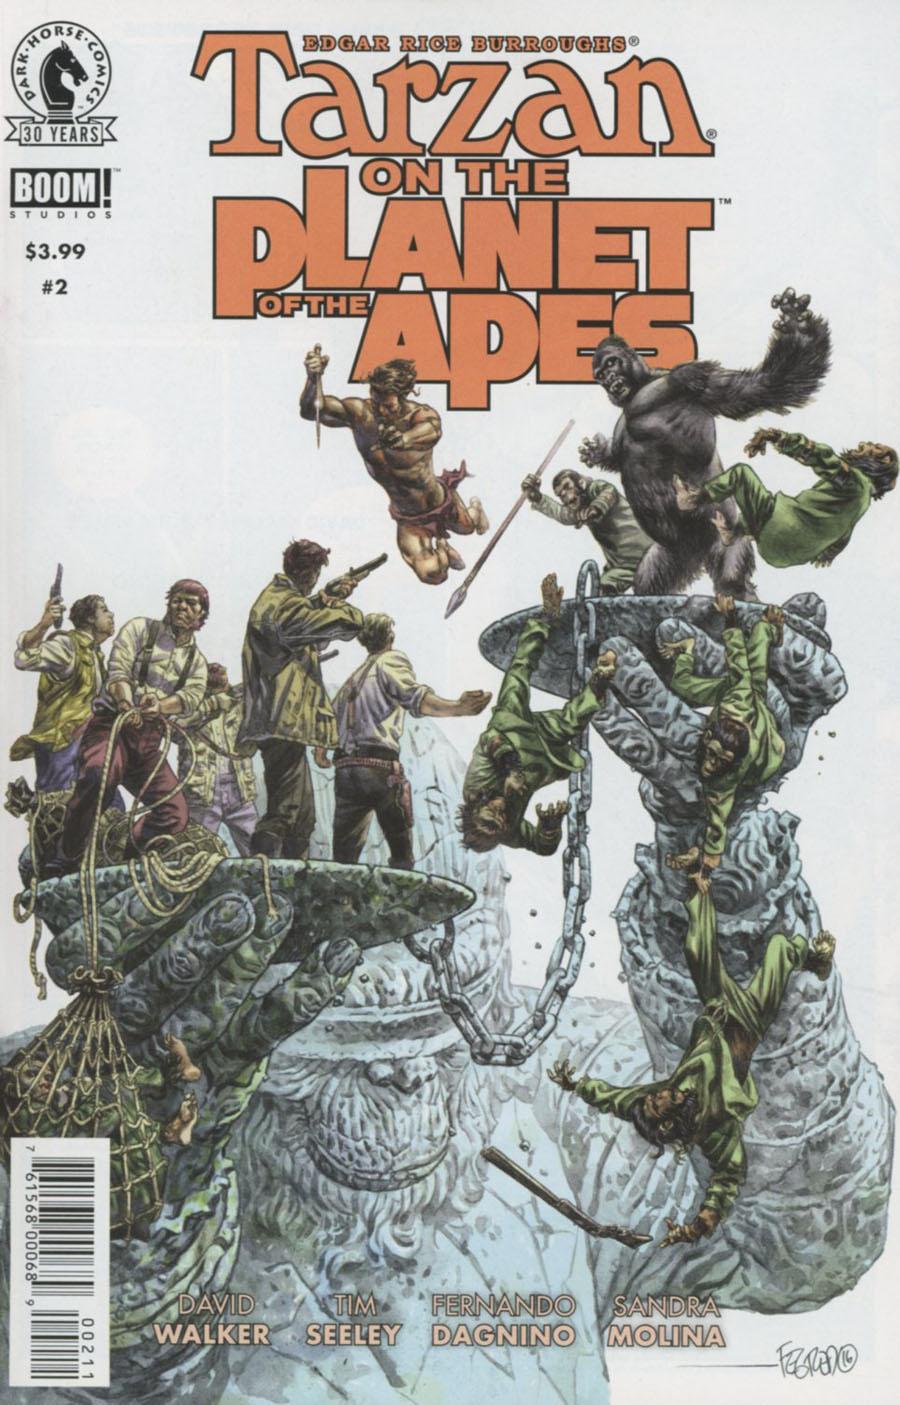 Tarzan On The Planet Of The Apes Vol. 1 #2